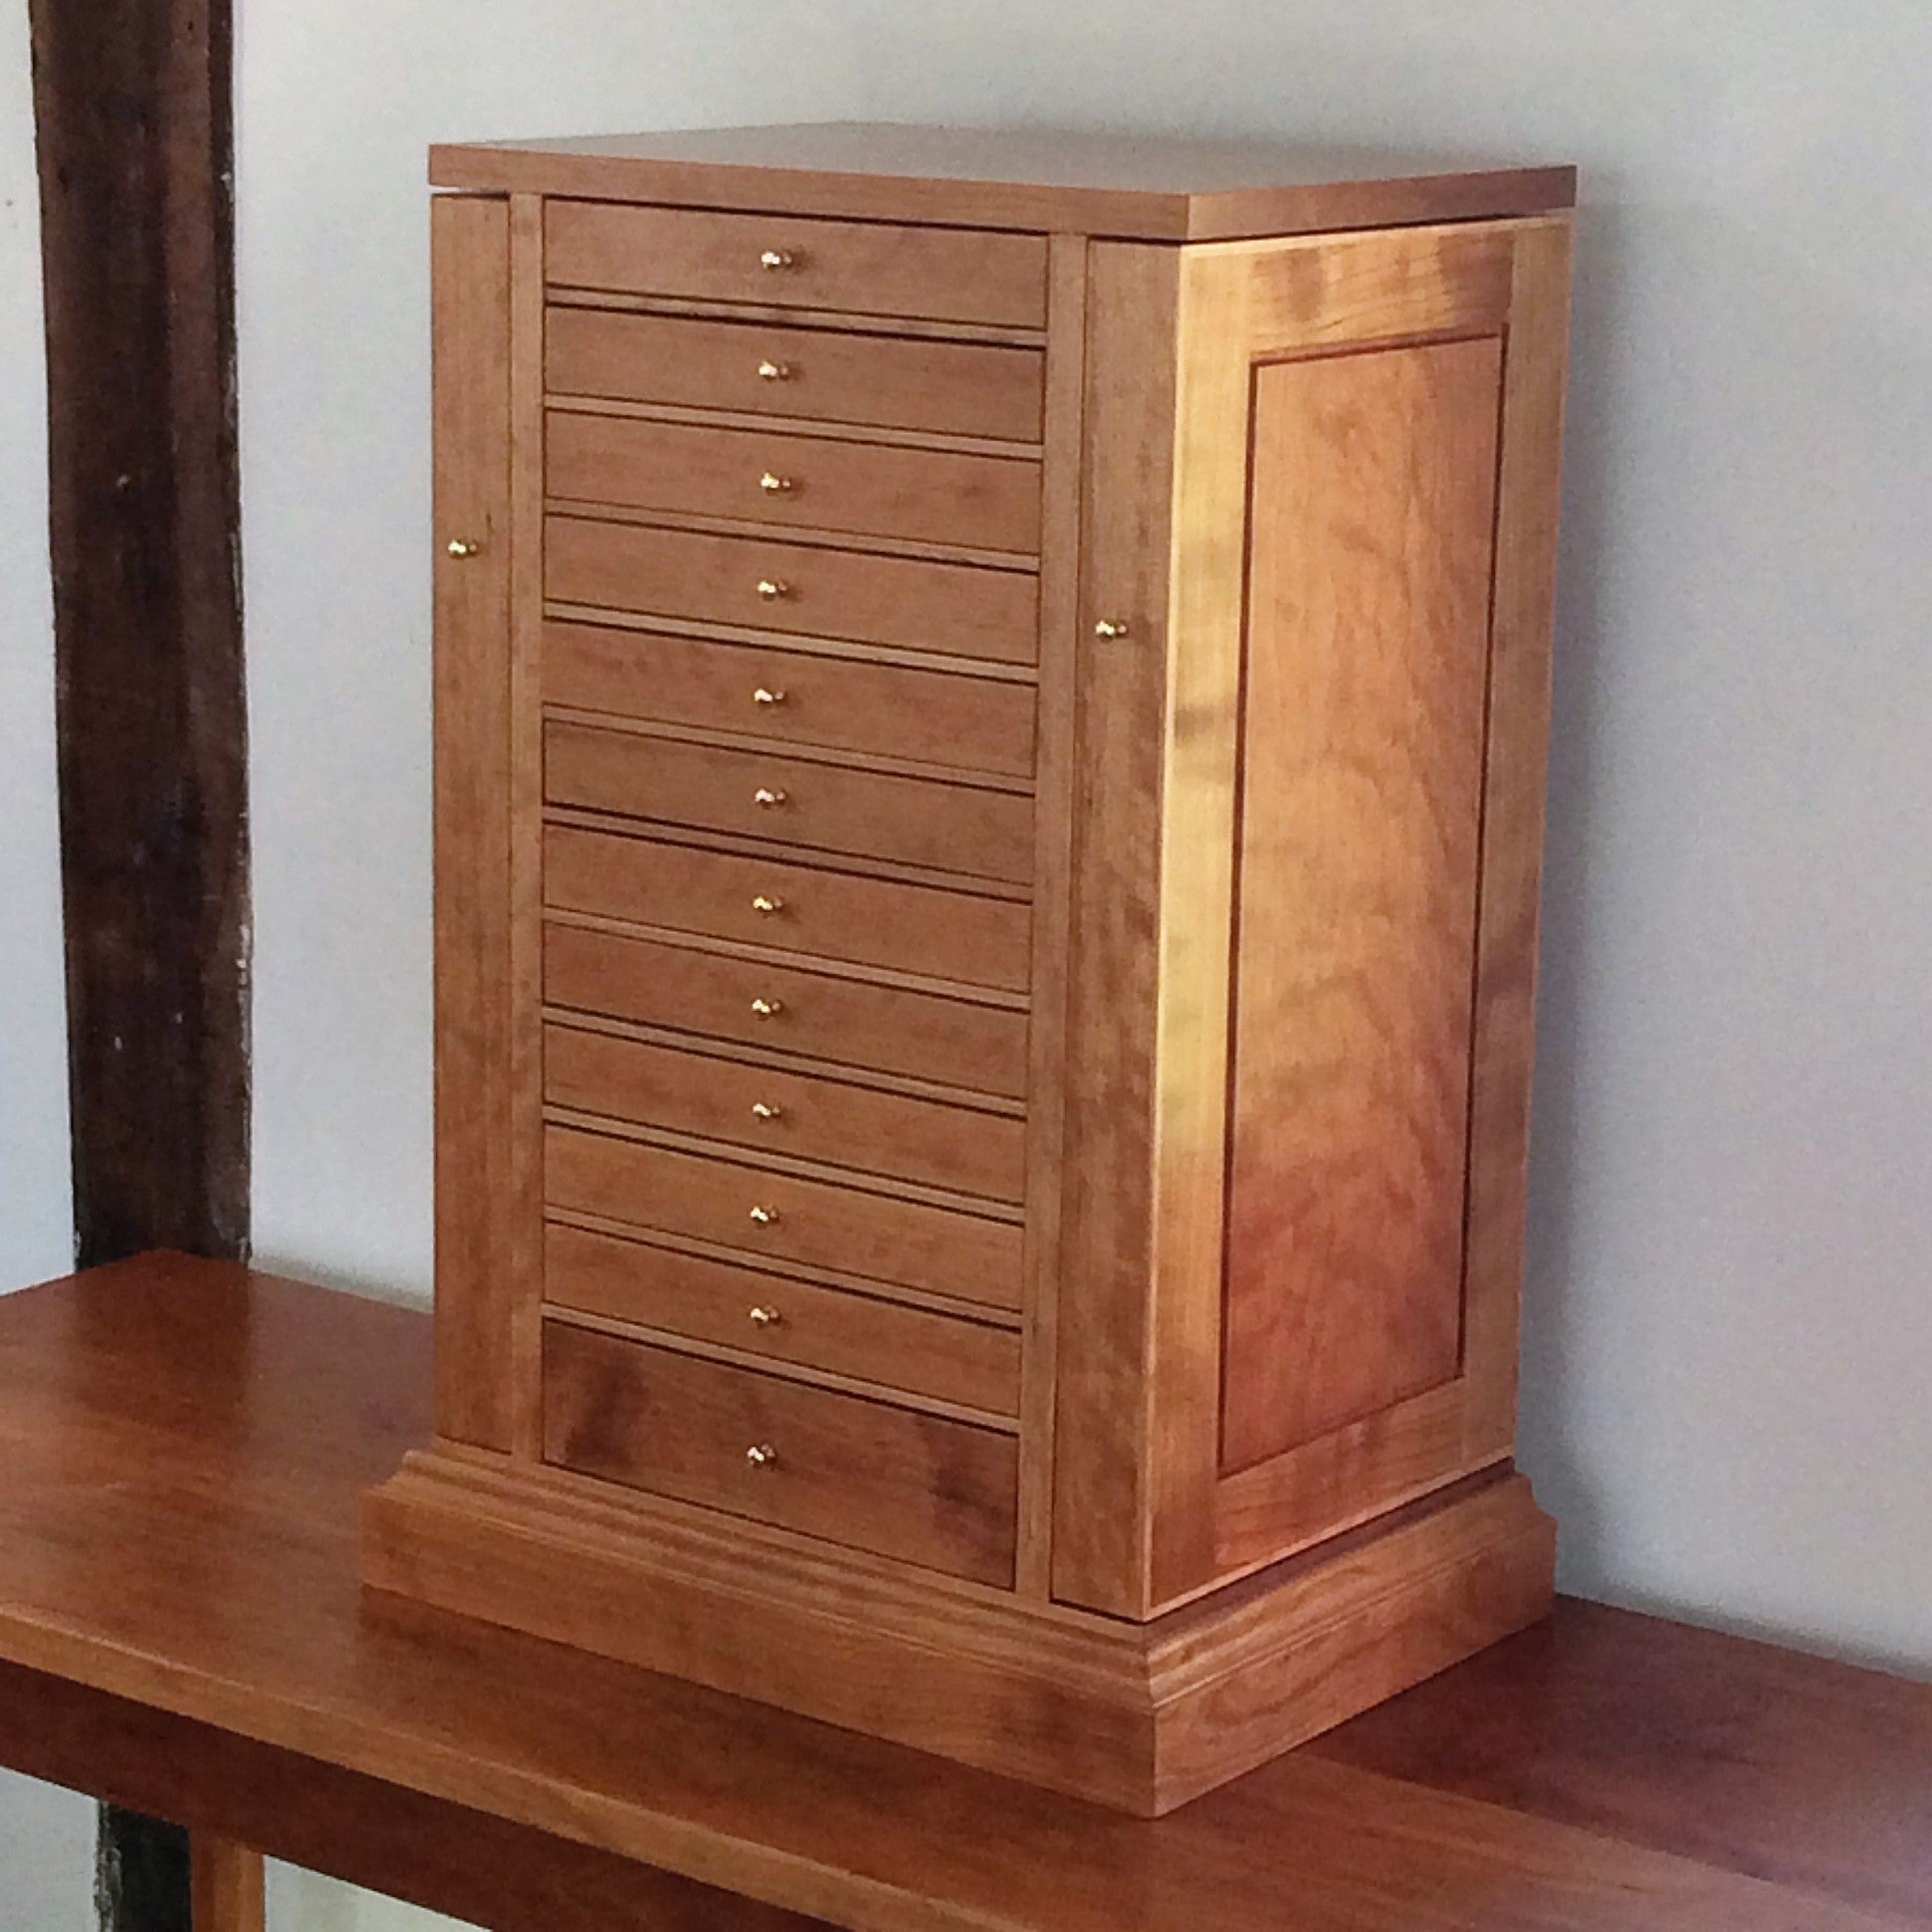 This tower was customized with a wrap around base and brass knobs. This one was made from curly cherry wood.